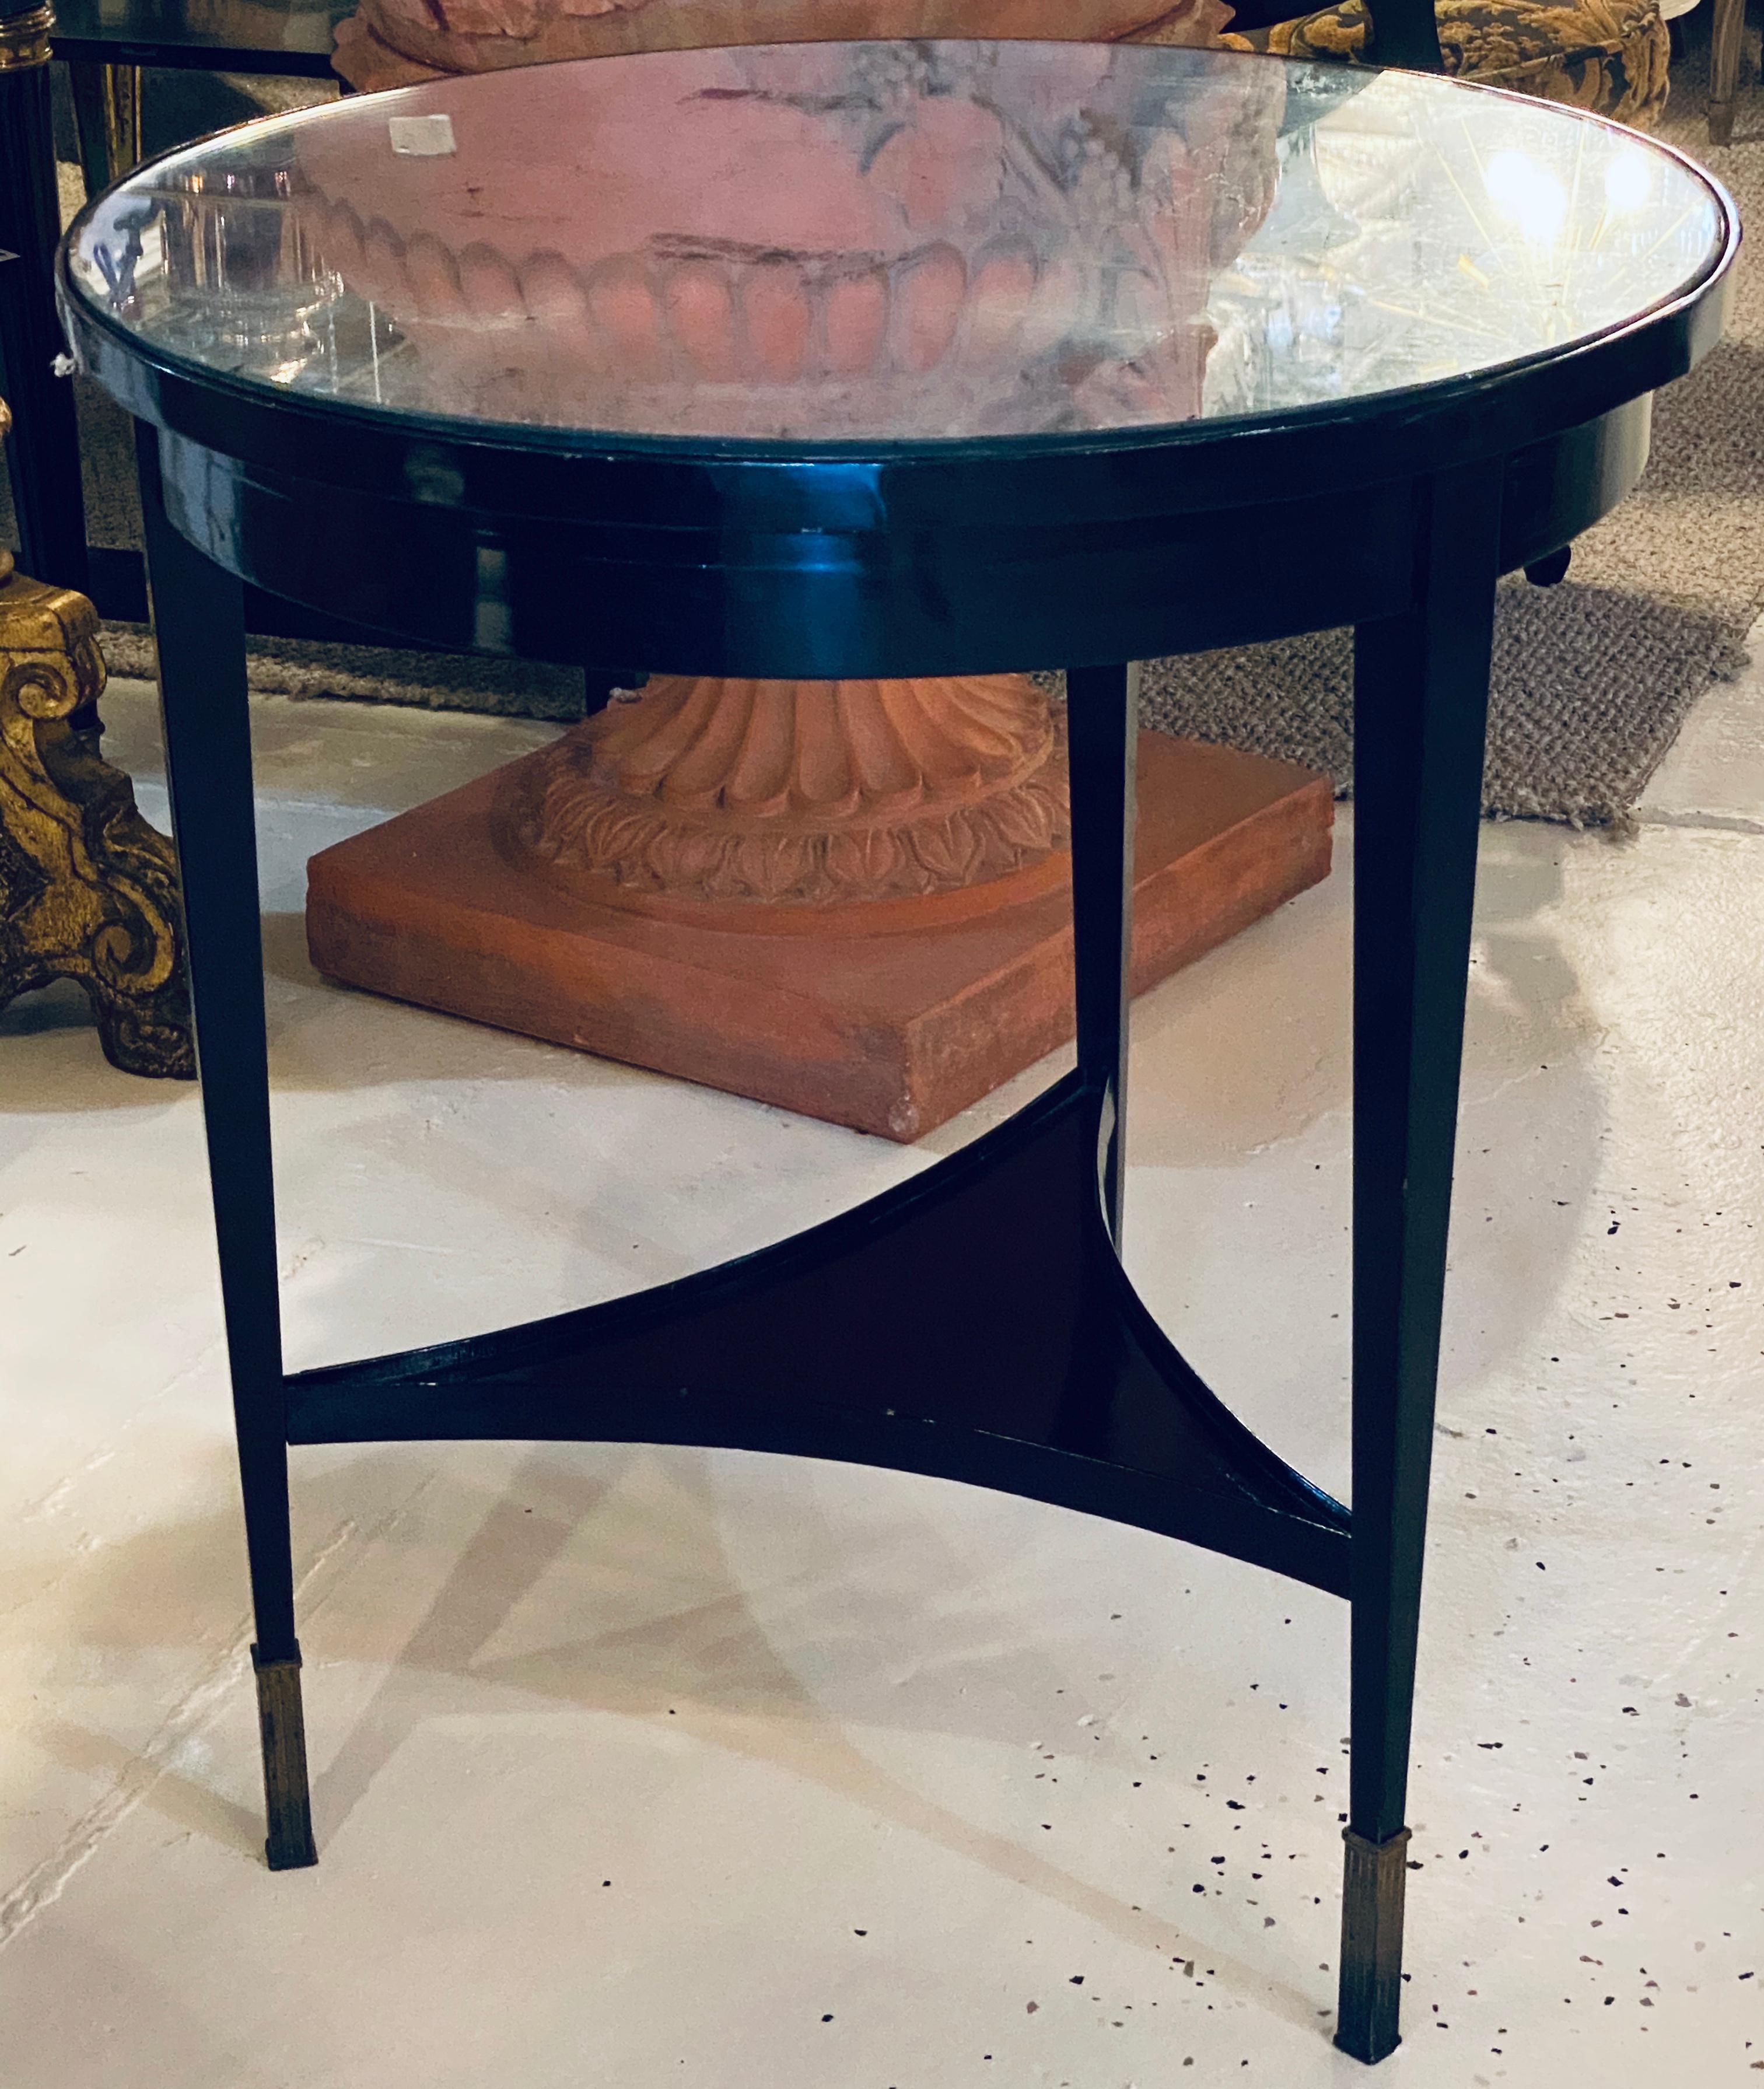 An ebonized silver gilt mirror top center or end table. On bronze sabots having tapering legs with a lower triangular inverted shelf this sleek and stylish end table is certain to add that Hollywood Regency charm that is highly sought after.